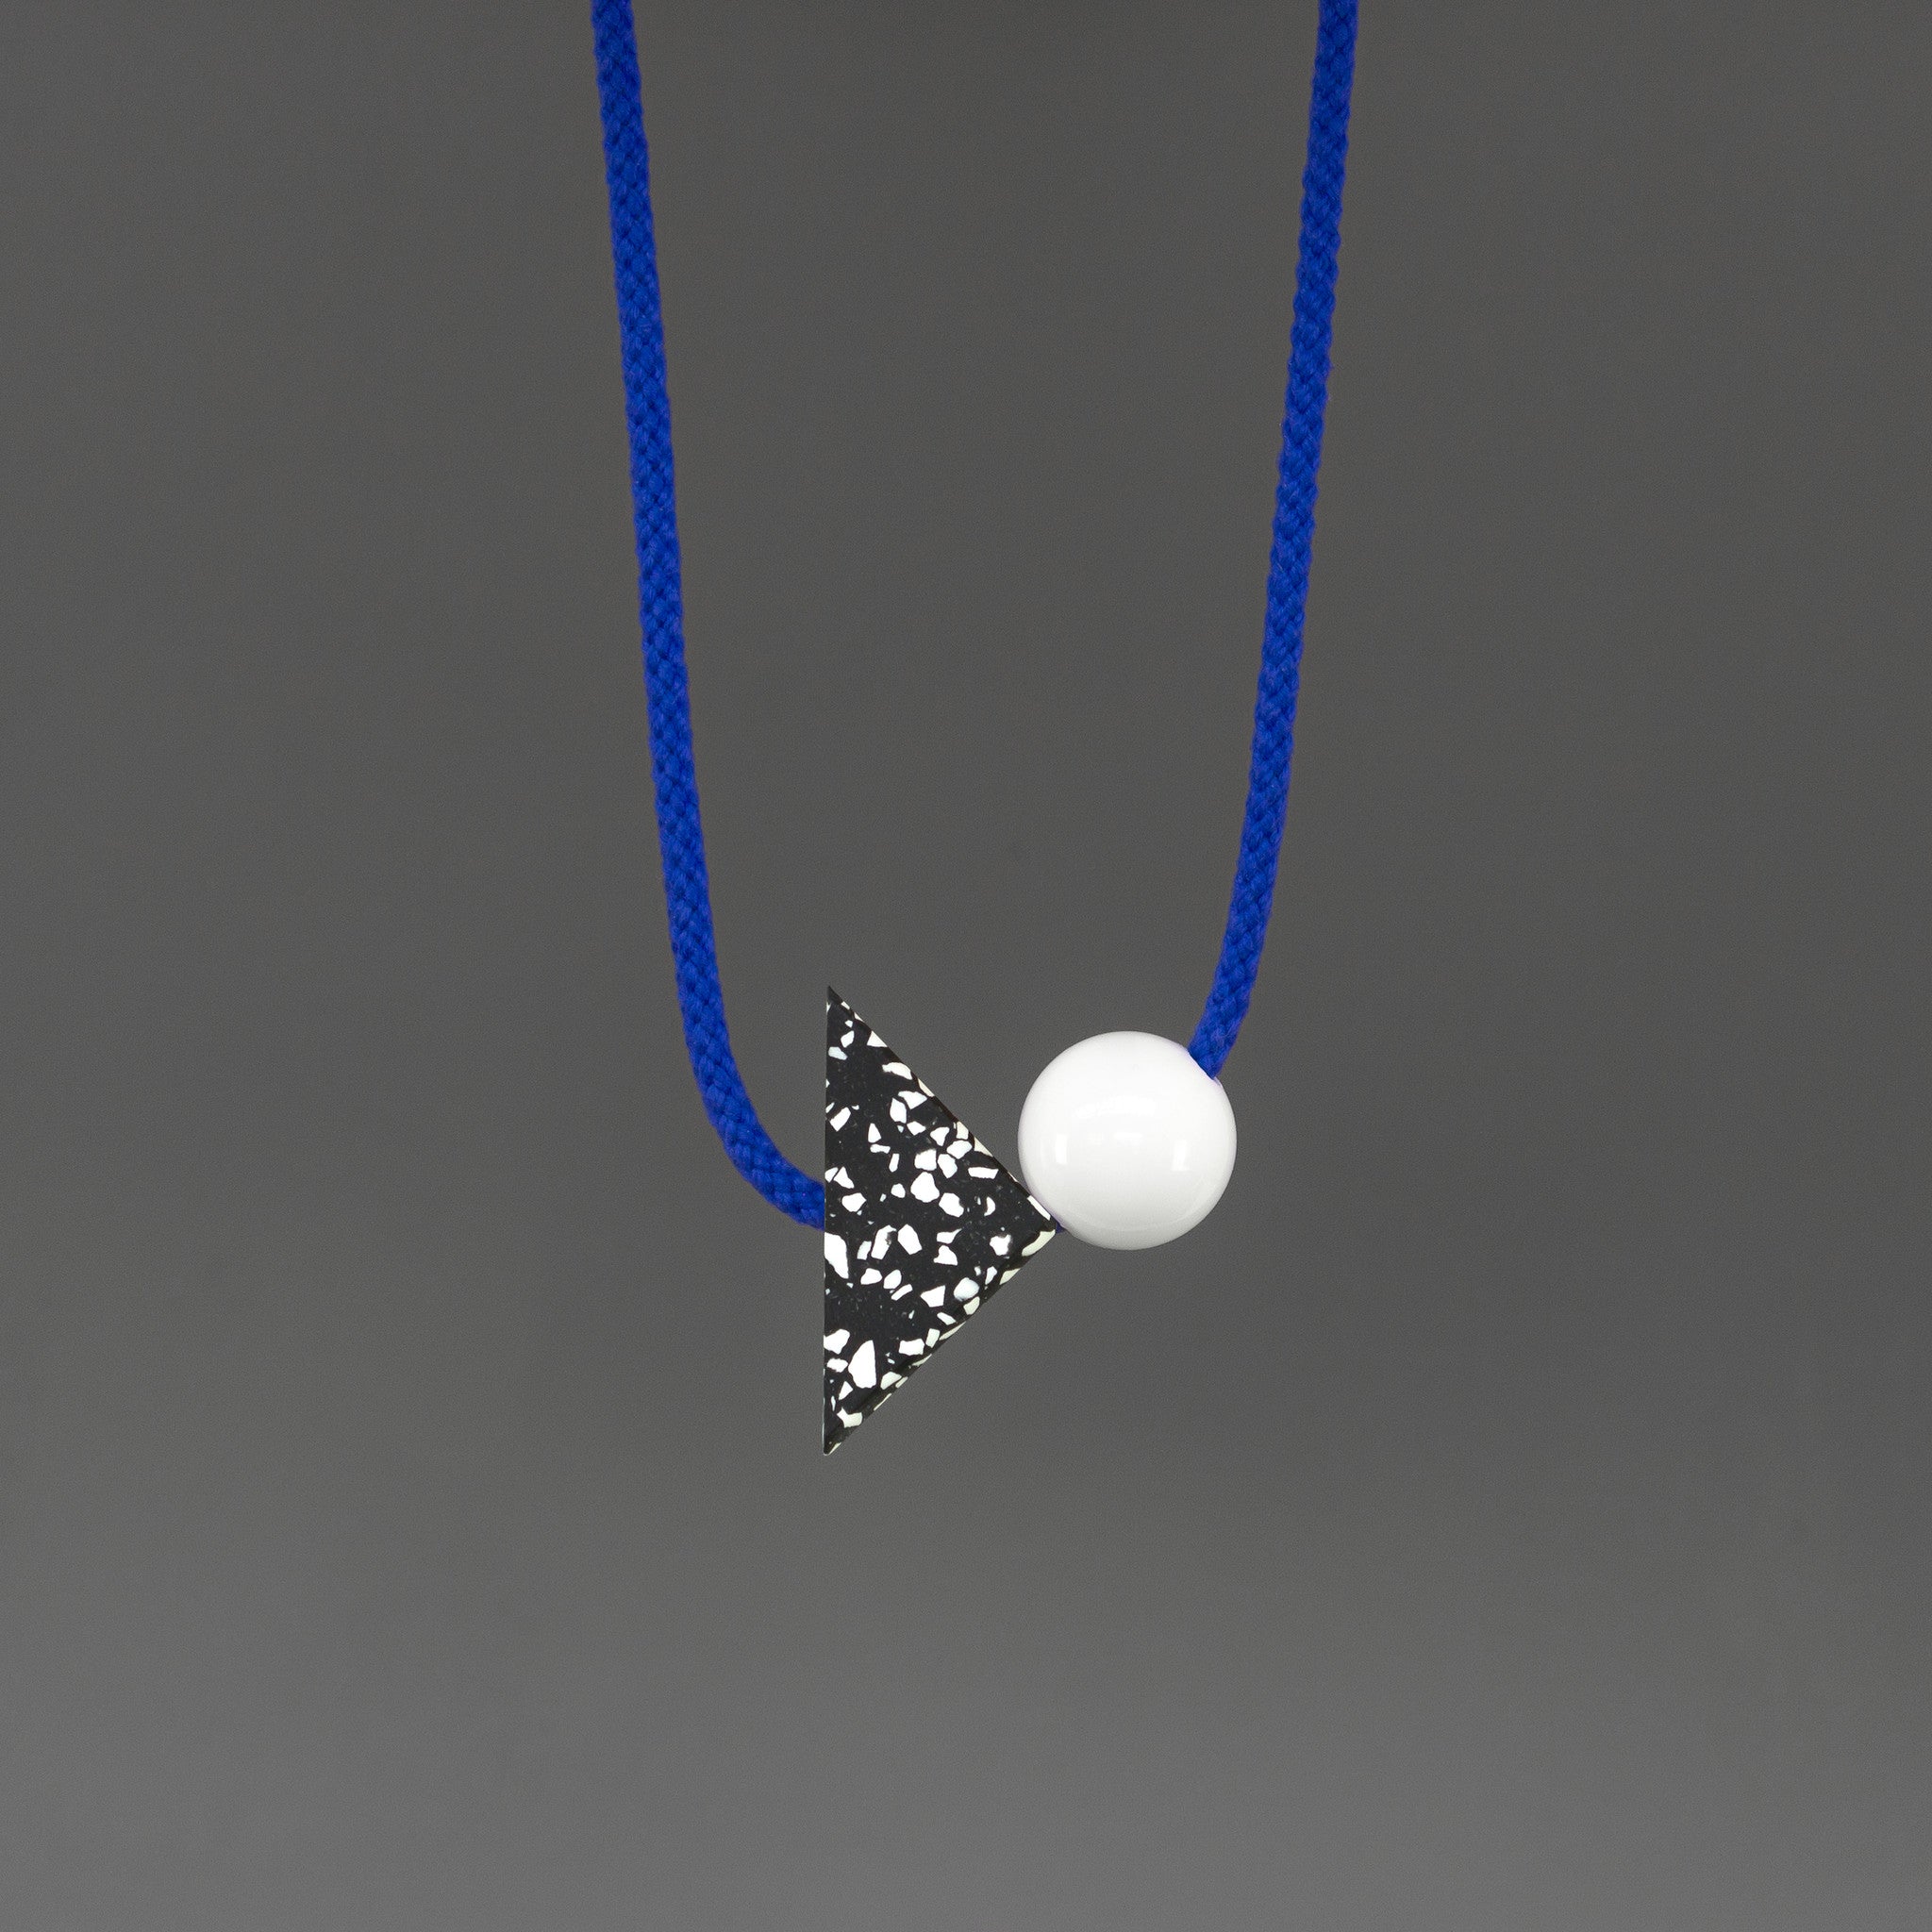 The Ilya necklace is a bright and bold statement. Stepping away from our signature black cord, Ilya's bright blue cord offers something different and looks great against a variety of tops. Illya is composed of 2 main parts - a black triangle with white speckles (70mm x 50mm) and a white resin ball (30mm). 